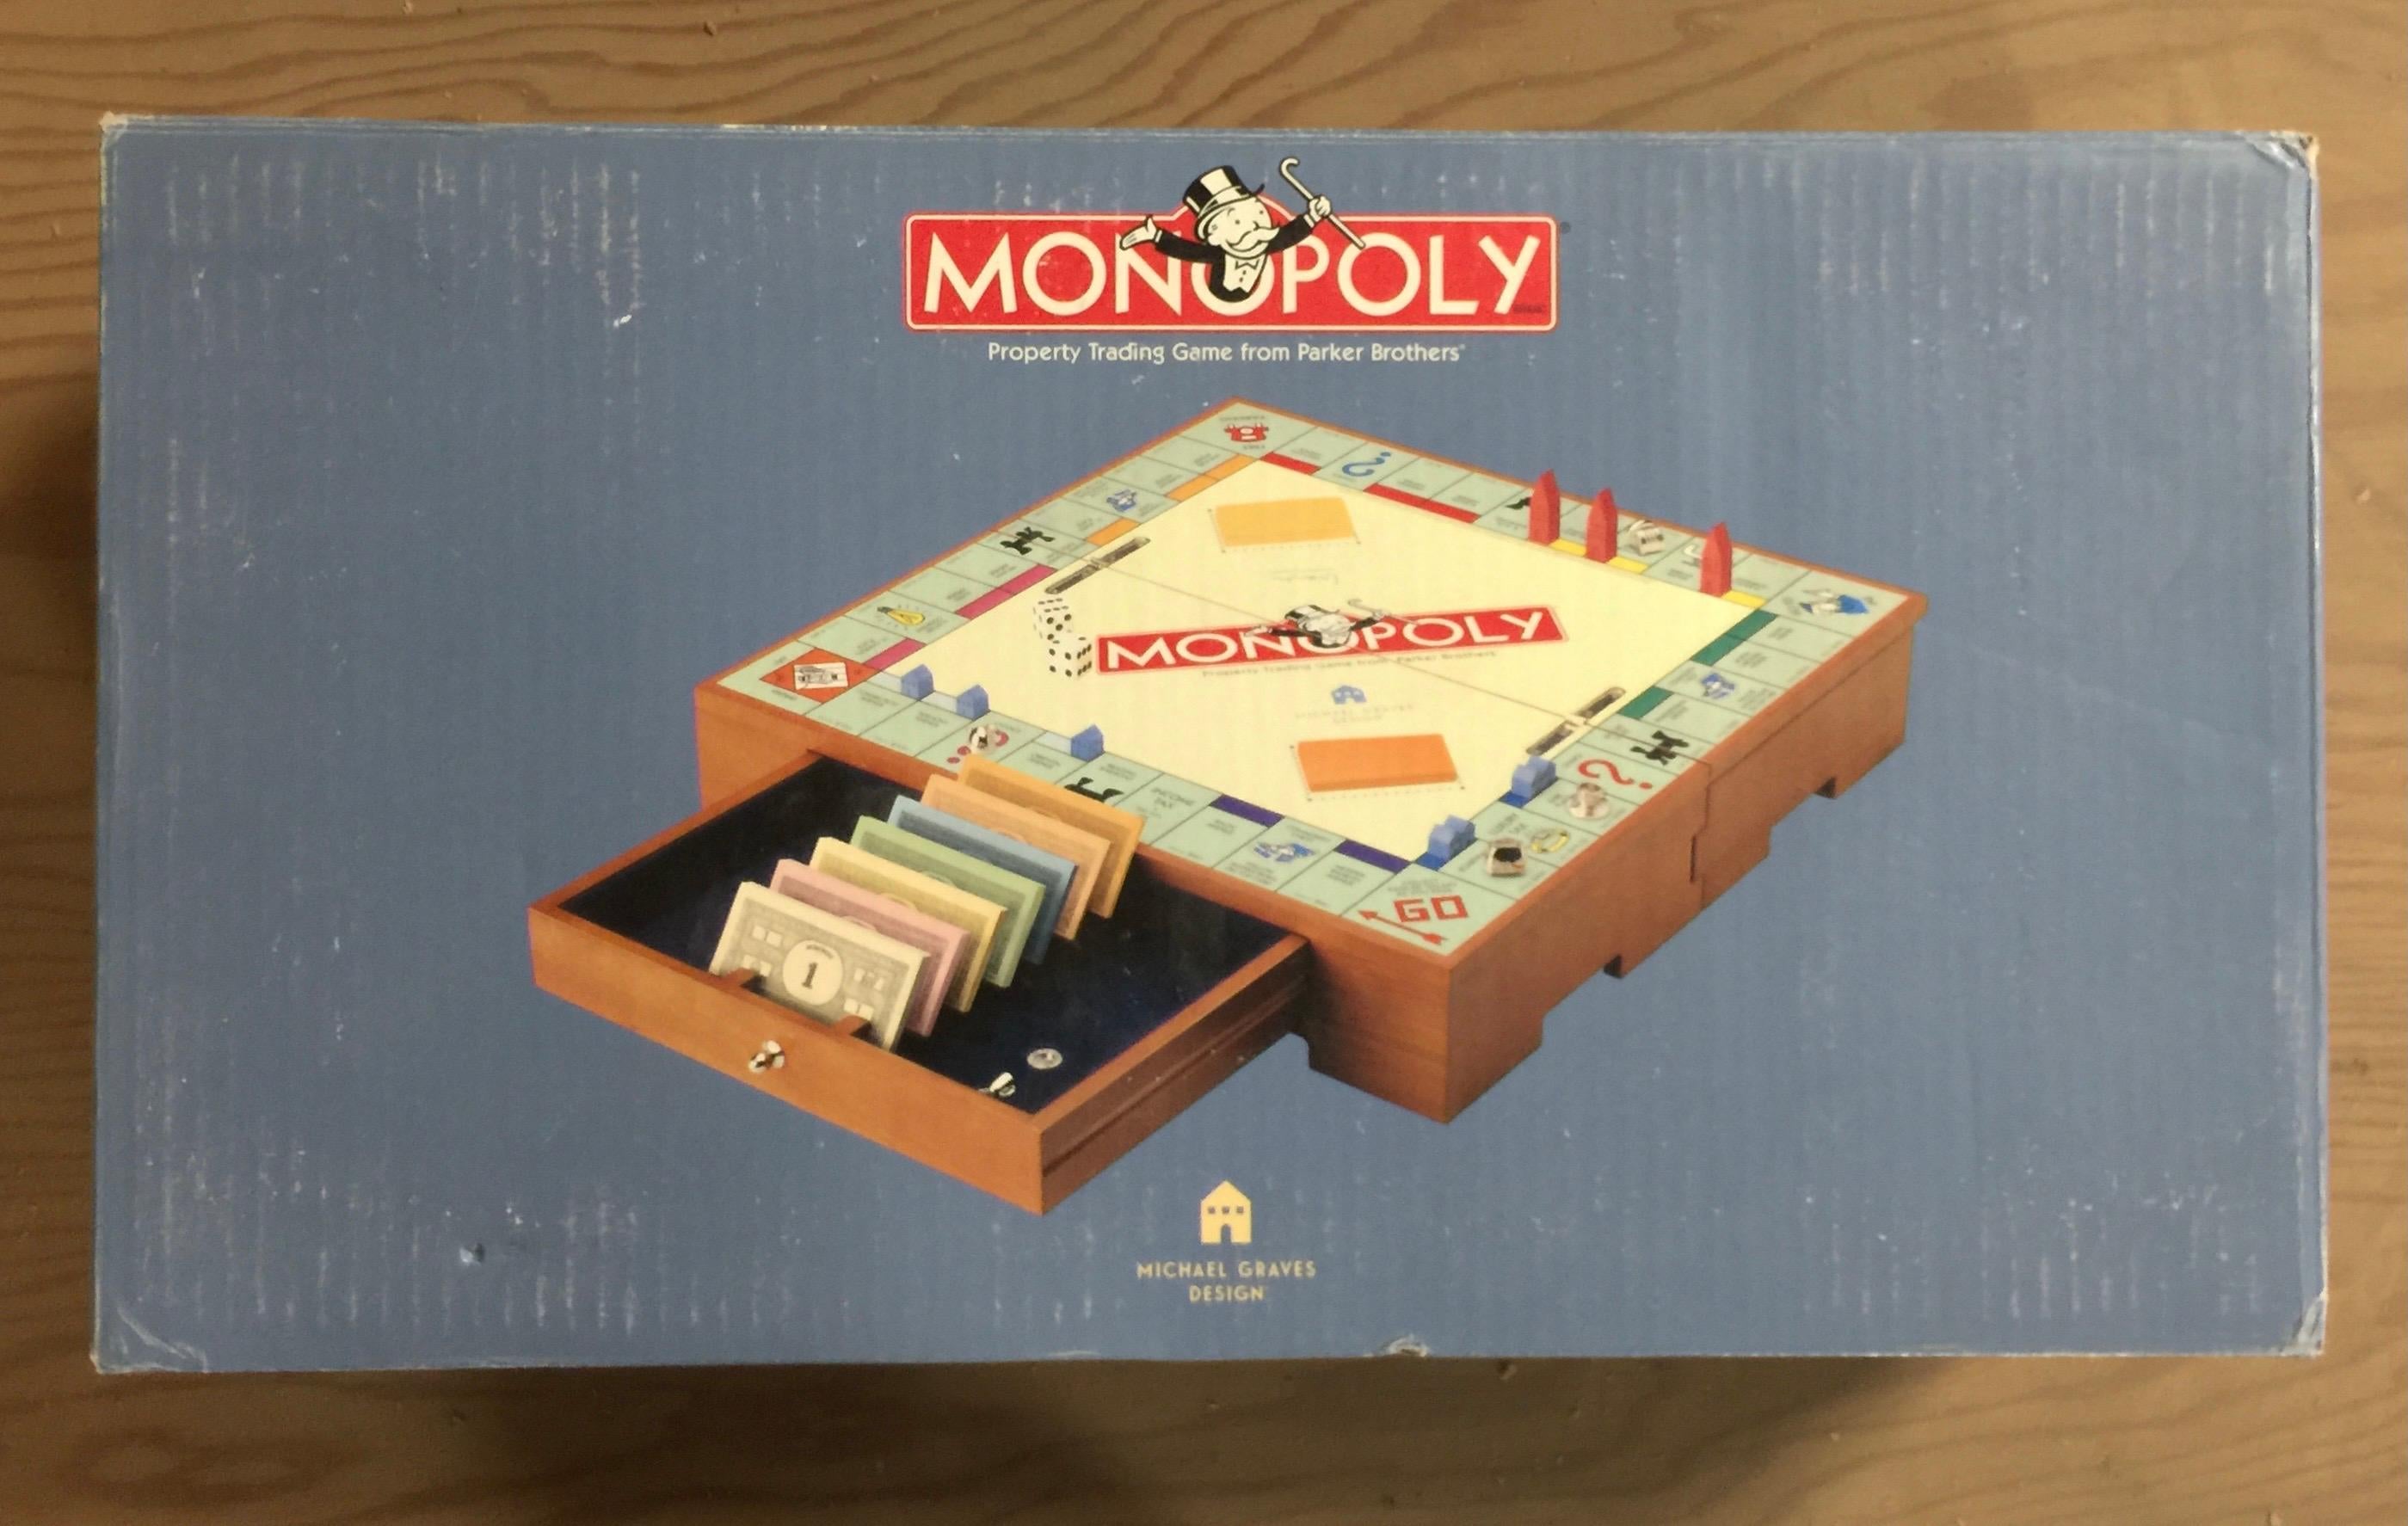 The Monopoly game set designed by Michael Graves (b. 1934 Indianapolis, IN - 2015 Princeton, NJ) for Parker Brothers. Circa 2002. 

Signed with Graves' signature incised in small metal disk on underside.

Features a cherry-finished wood box that